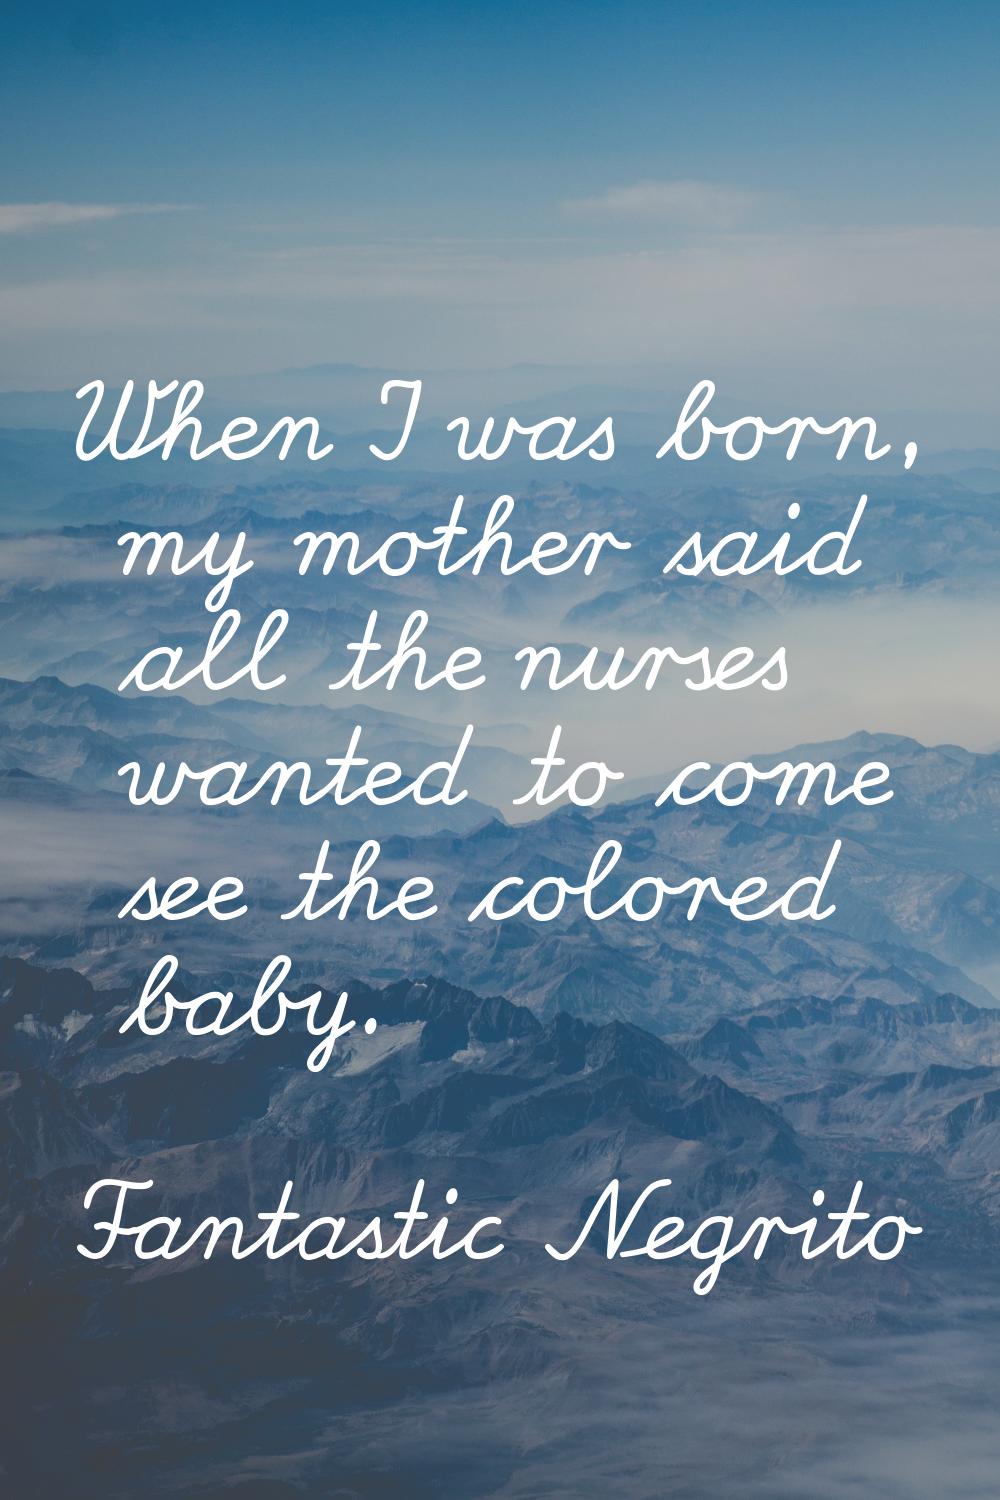 When I was born, my mother said all the nurses wanted to come see the colored baby.